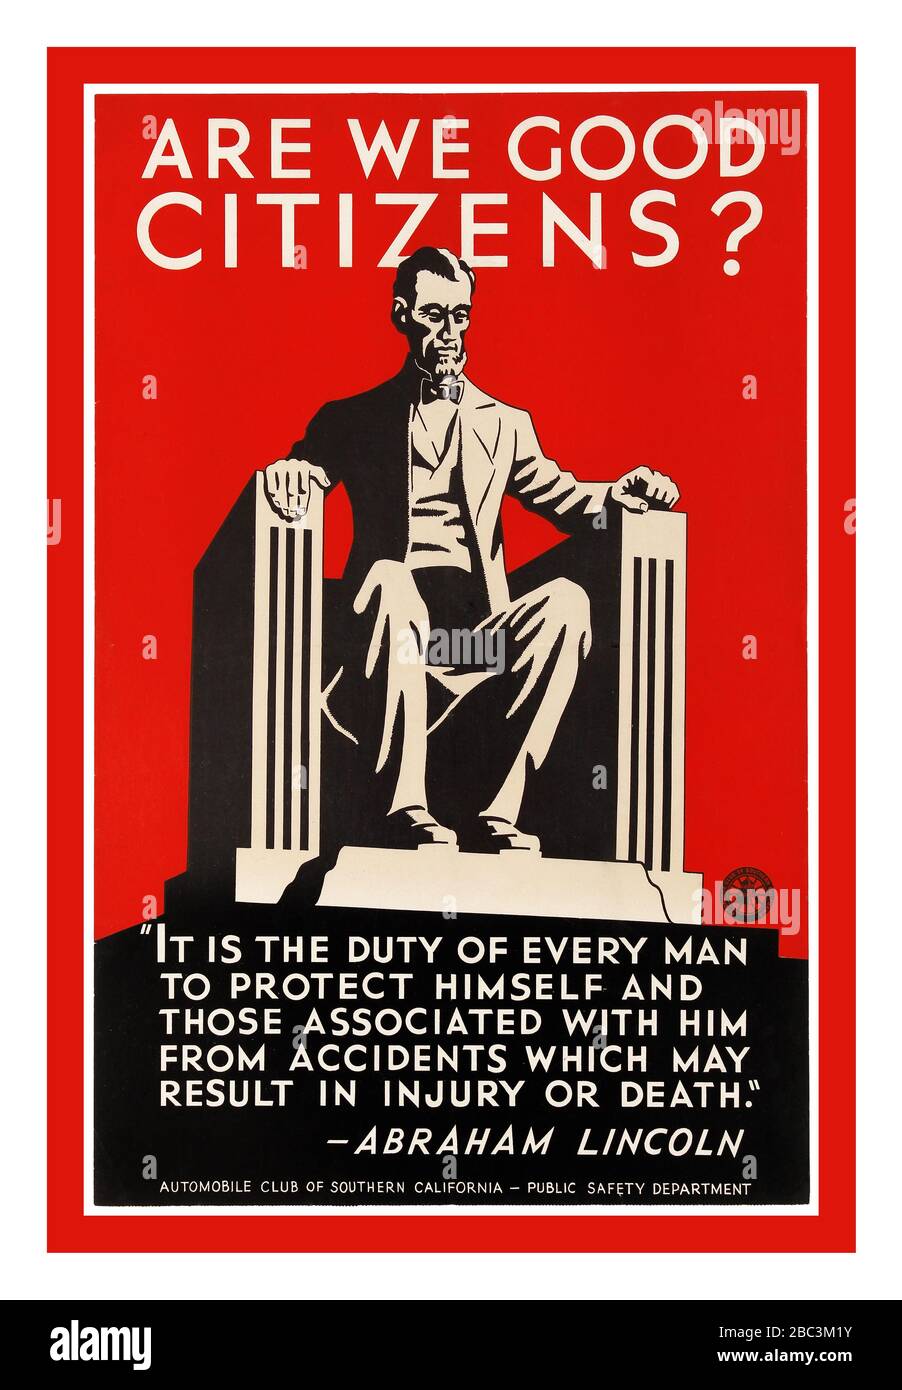 Vintage 1930s Art Deco public safety poster 'Are We Good Citizens'? released by  Automobile Club of Southern California. Illustration  of Lincoln Memorial with  quote from Abraham Lincoln - It is the duty of every man to protect himself and those associated with him from accidents which may result in injury or death. USA, year of printing:1930s Stock Photo